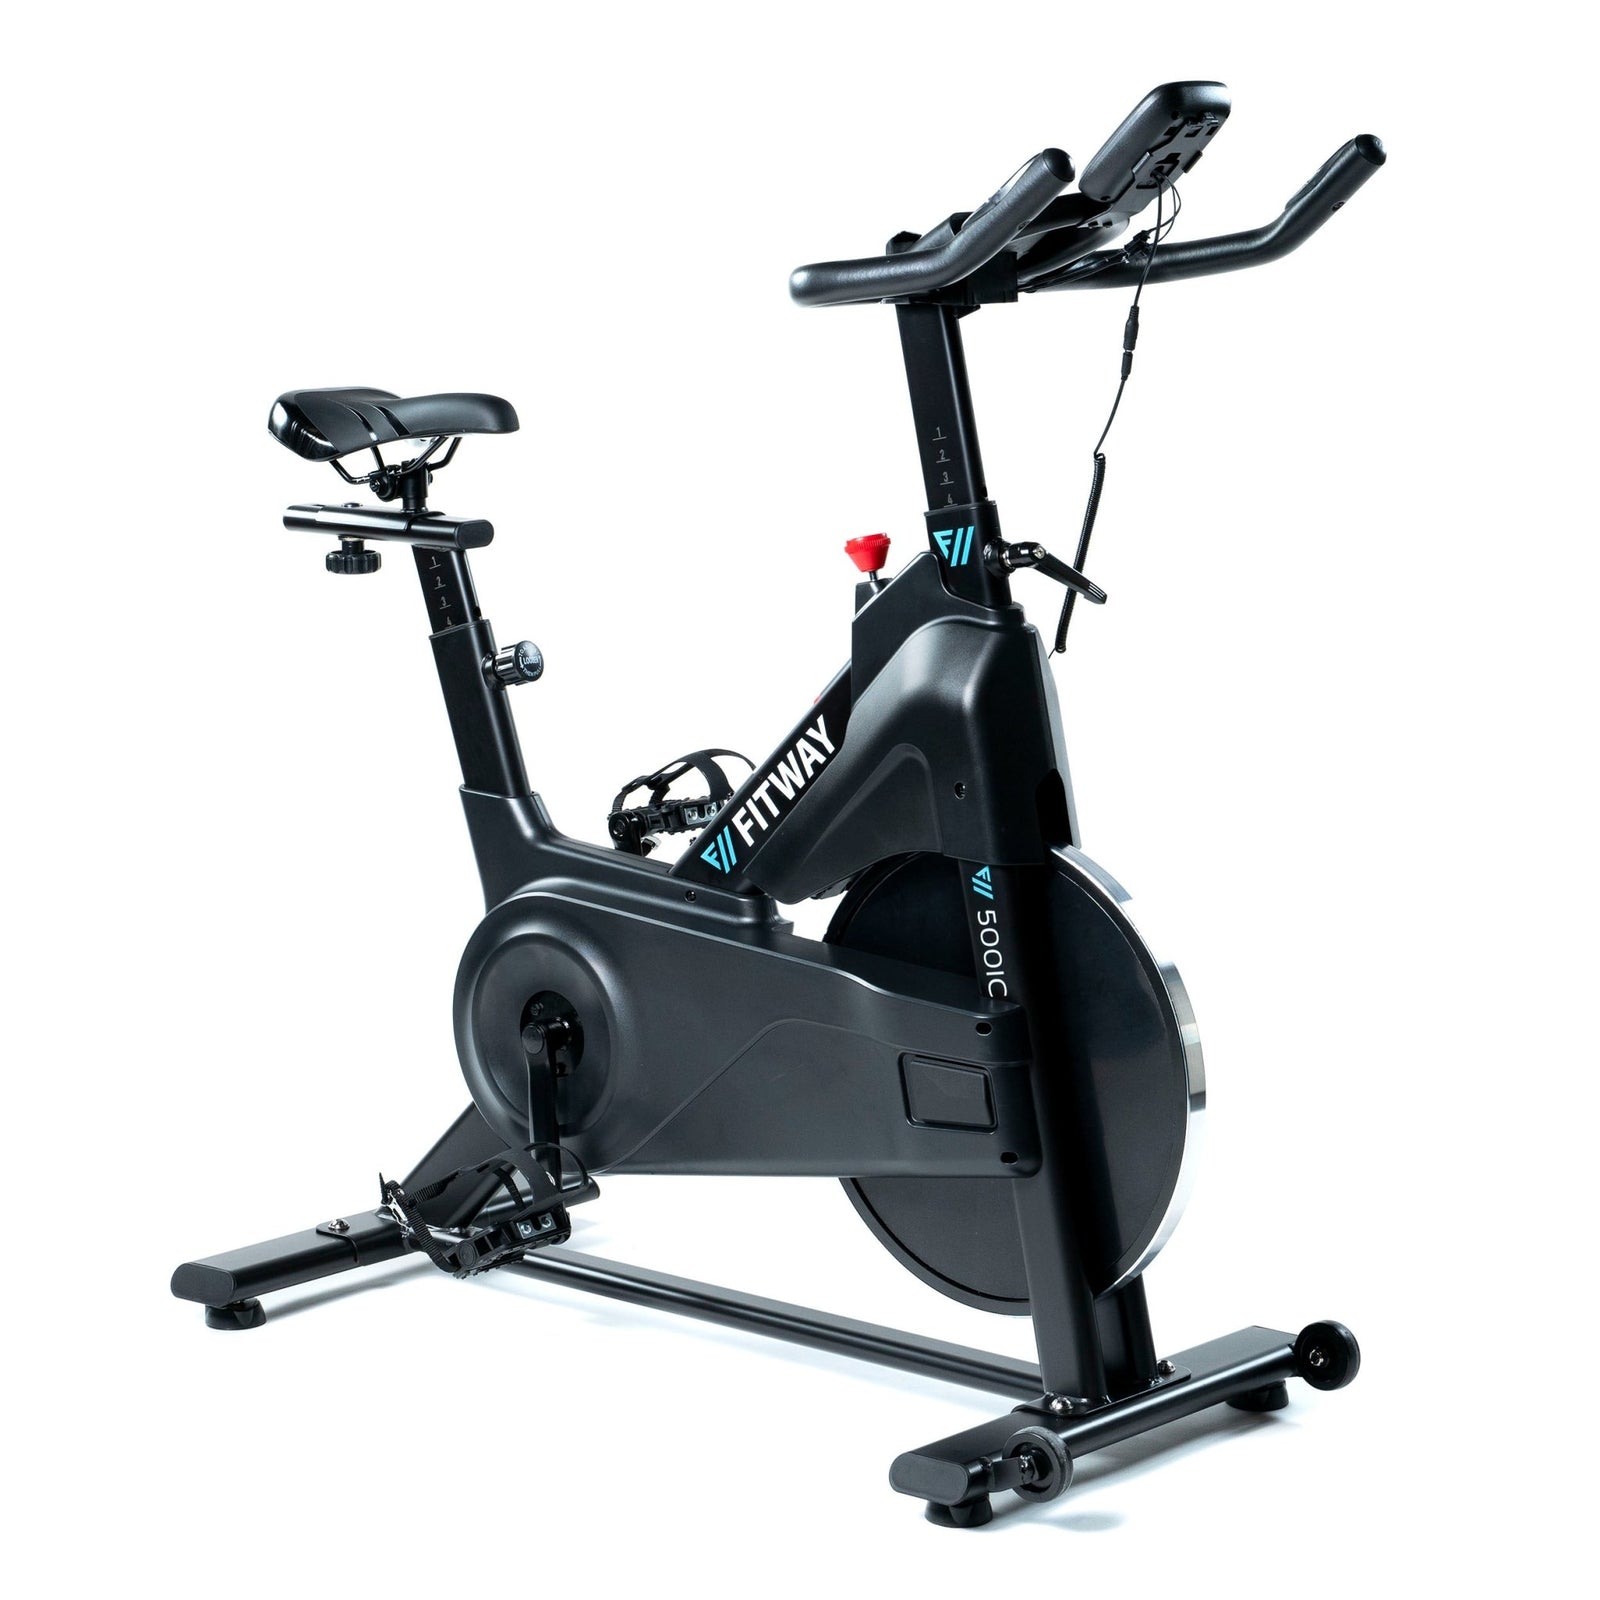 Canada's Best Selection of Exercise Bikes